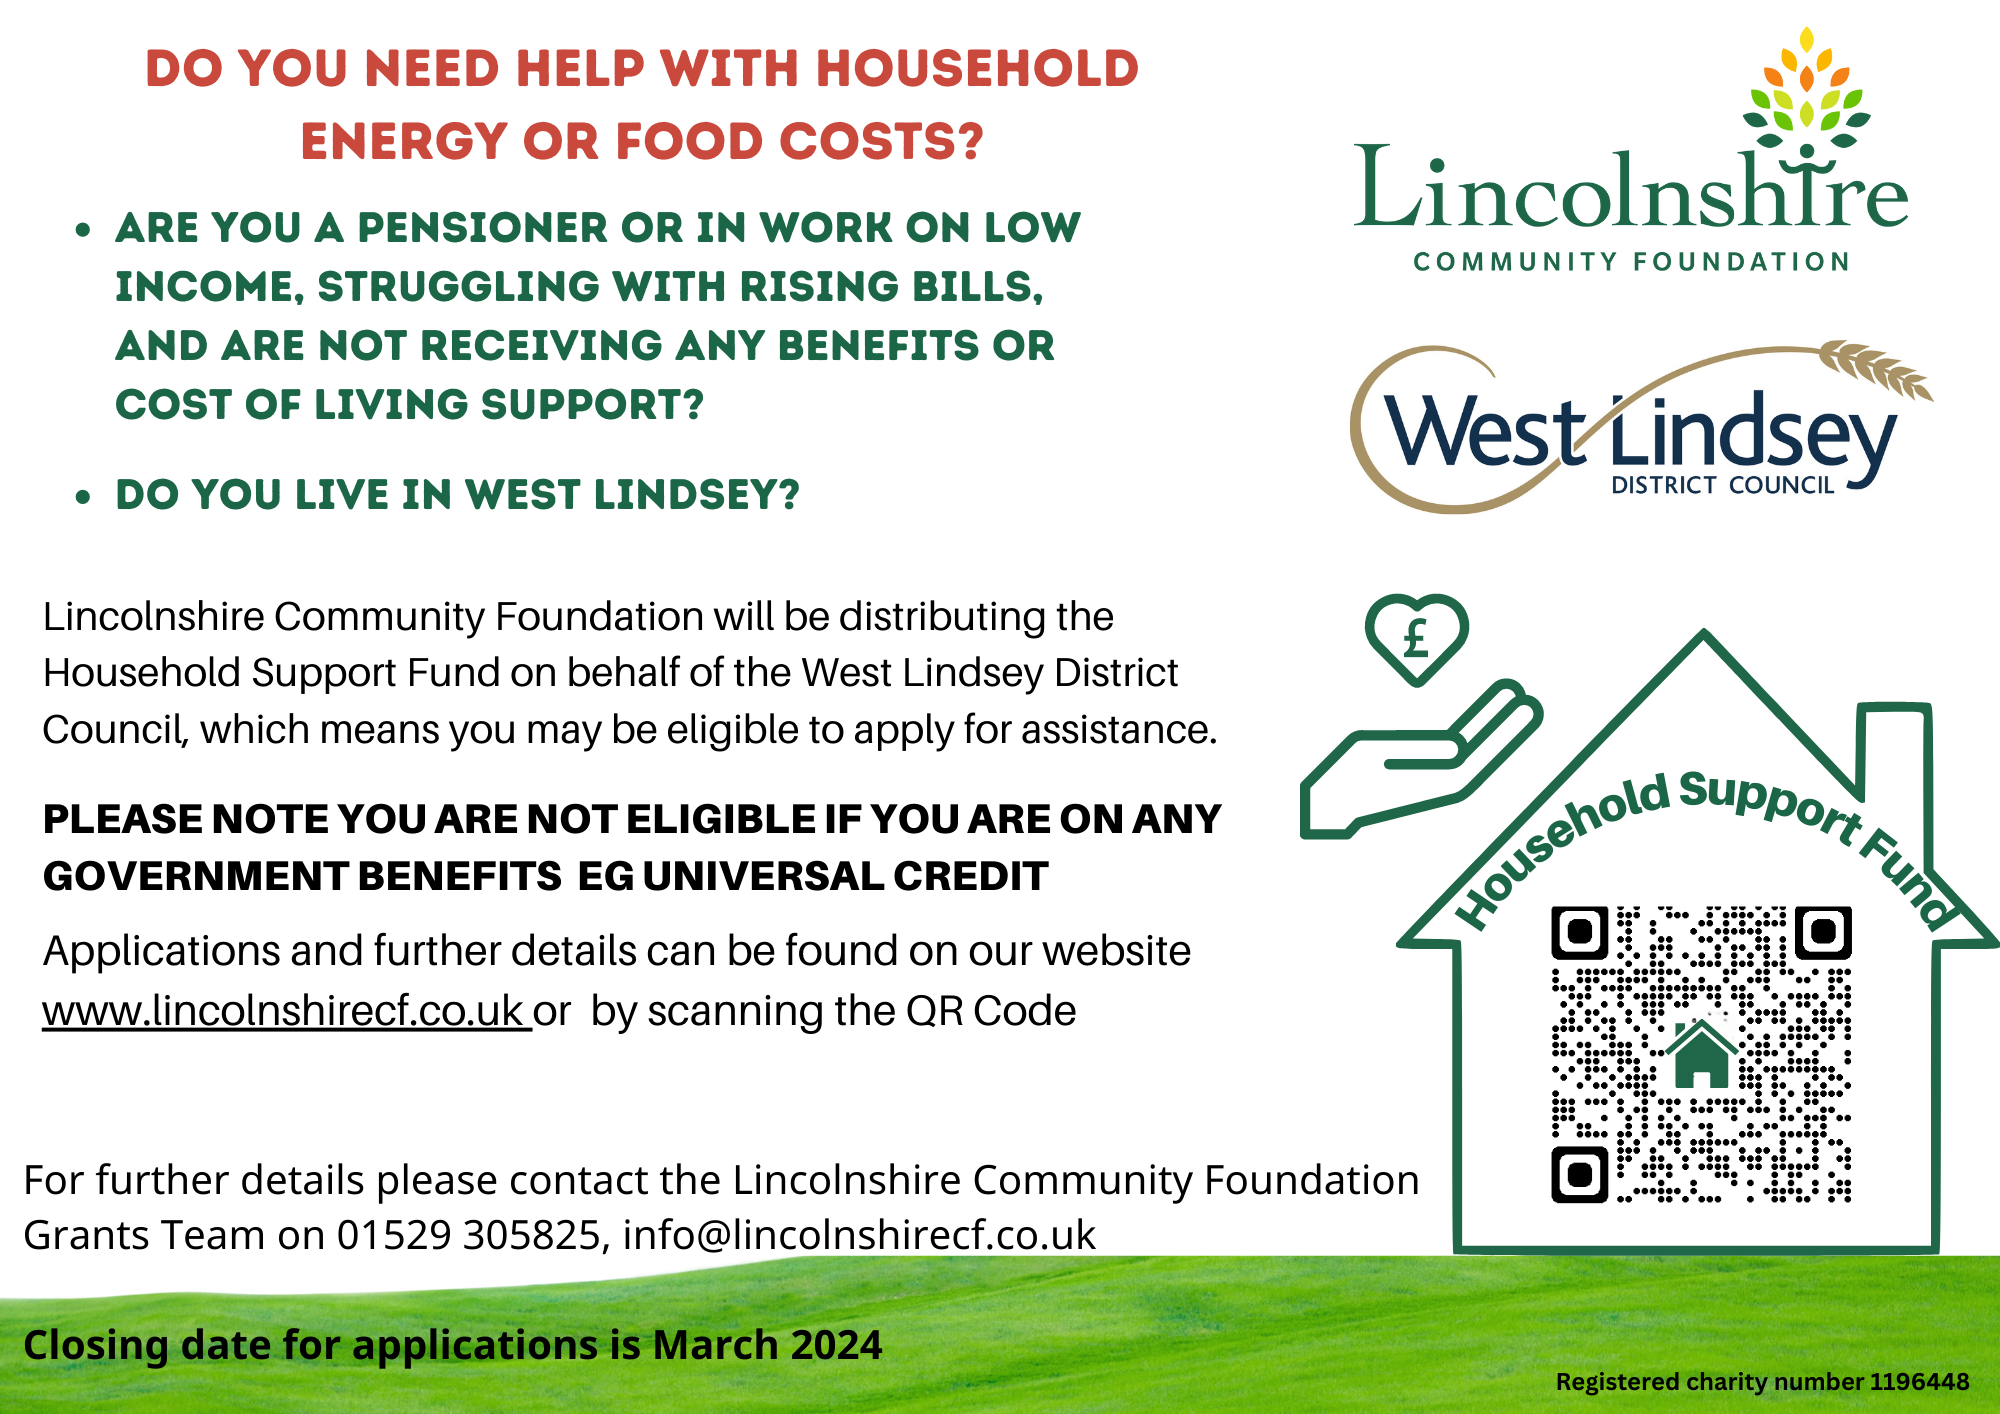 Household Support Fund launched in West Lindsey